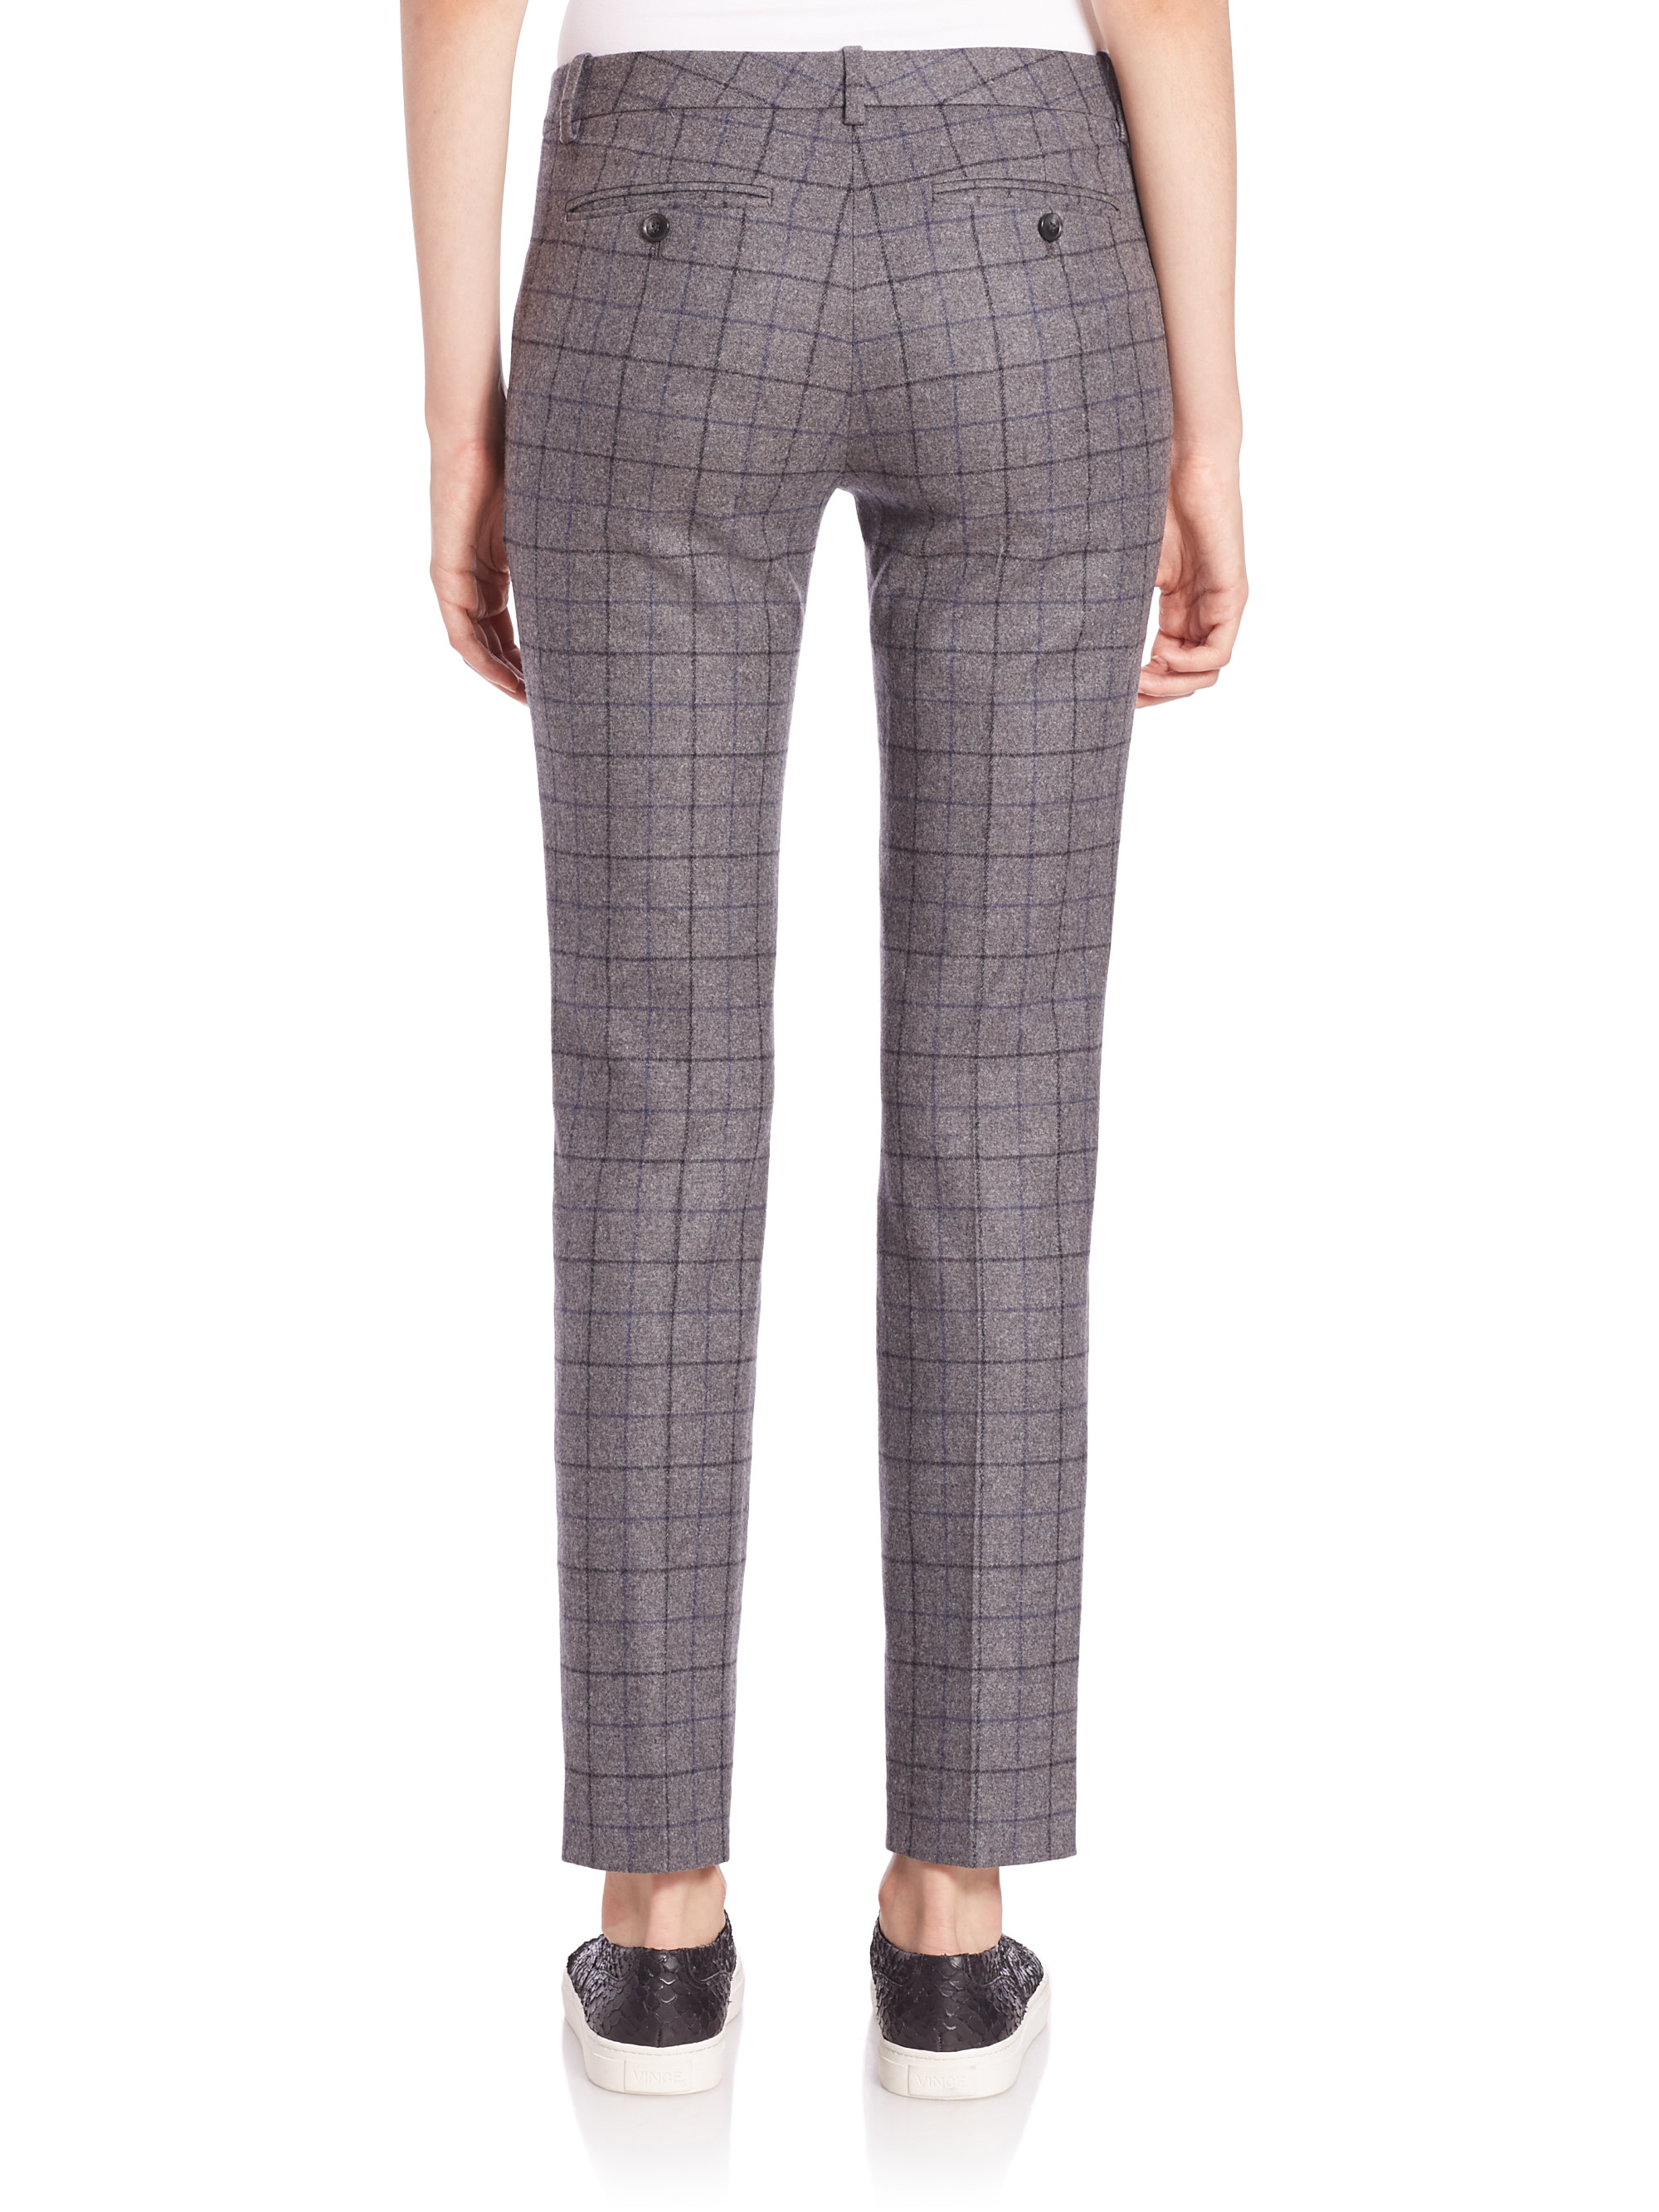 Theory Treeca Plaid Stretch-wool Pants in Charcoal (Gray) - Lyst